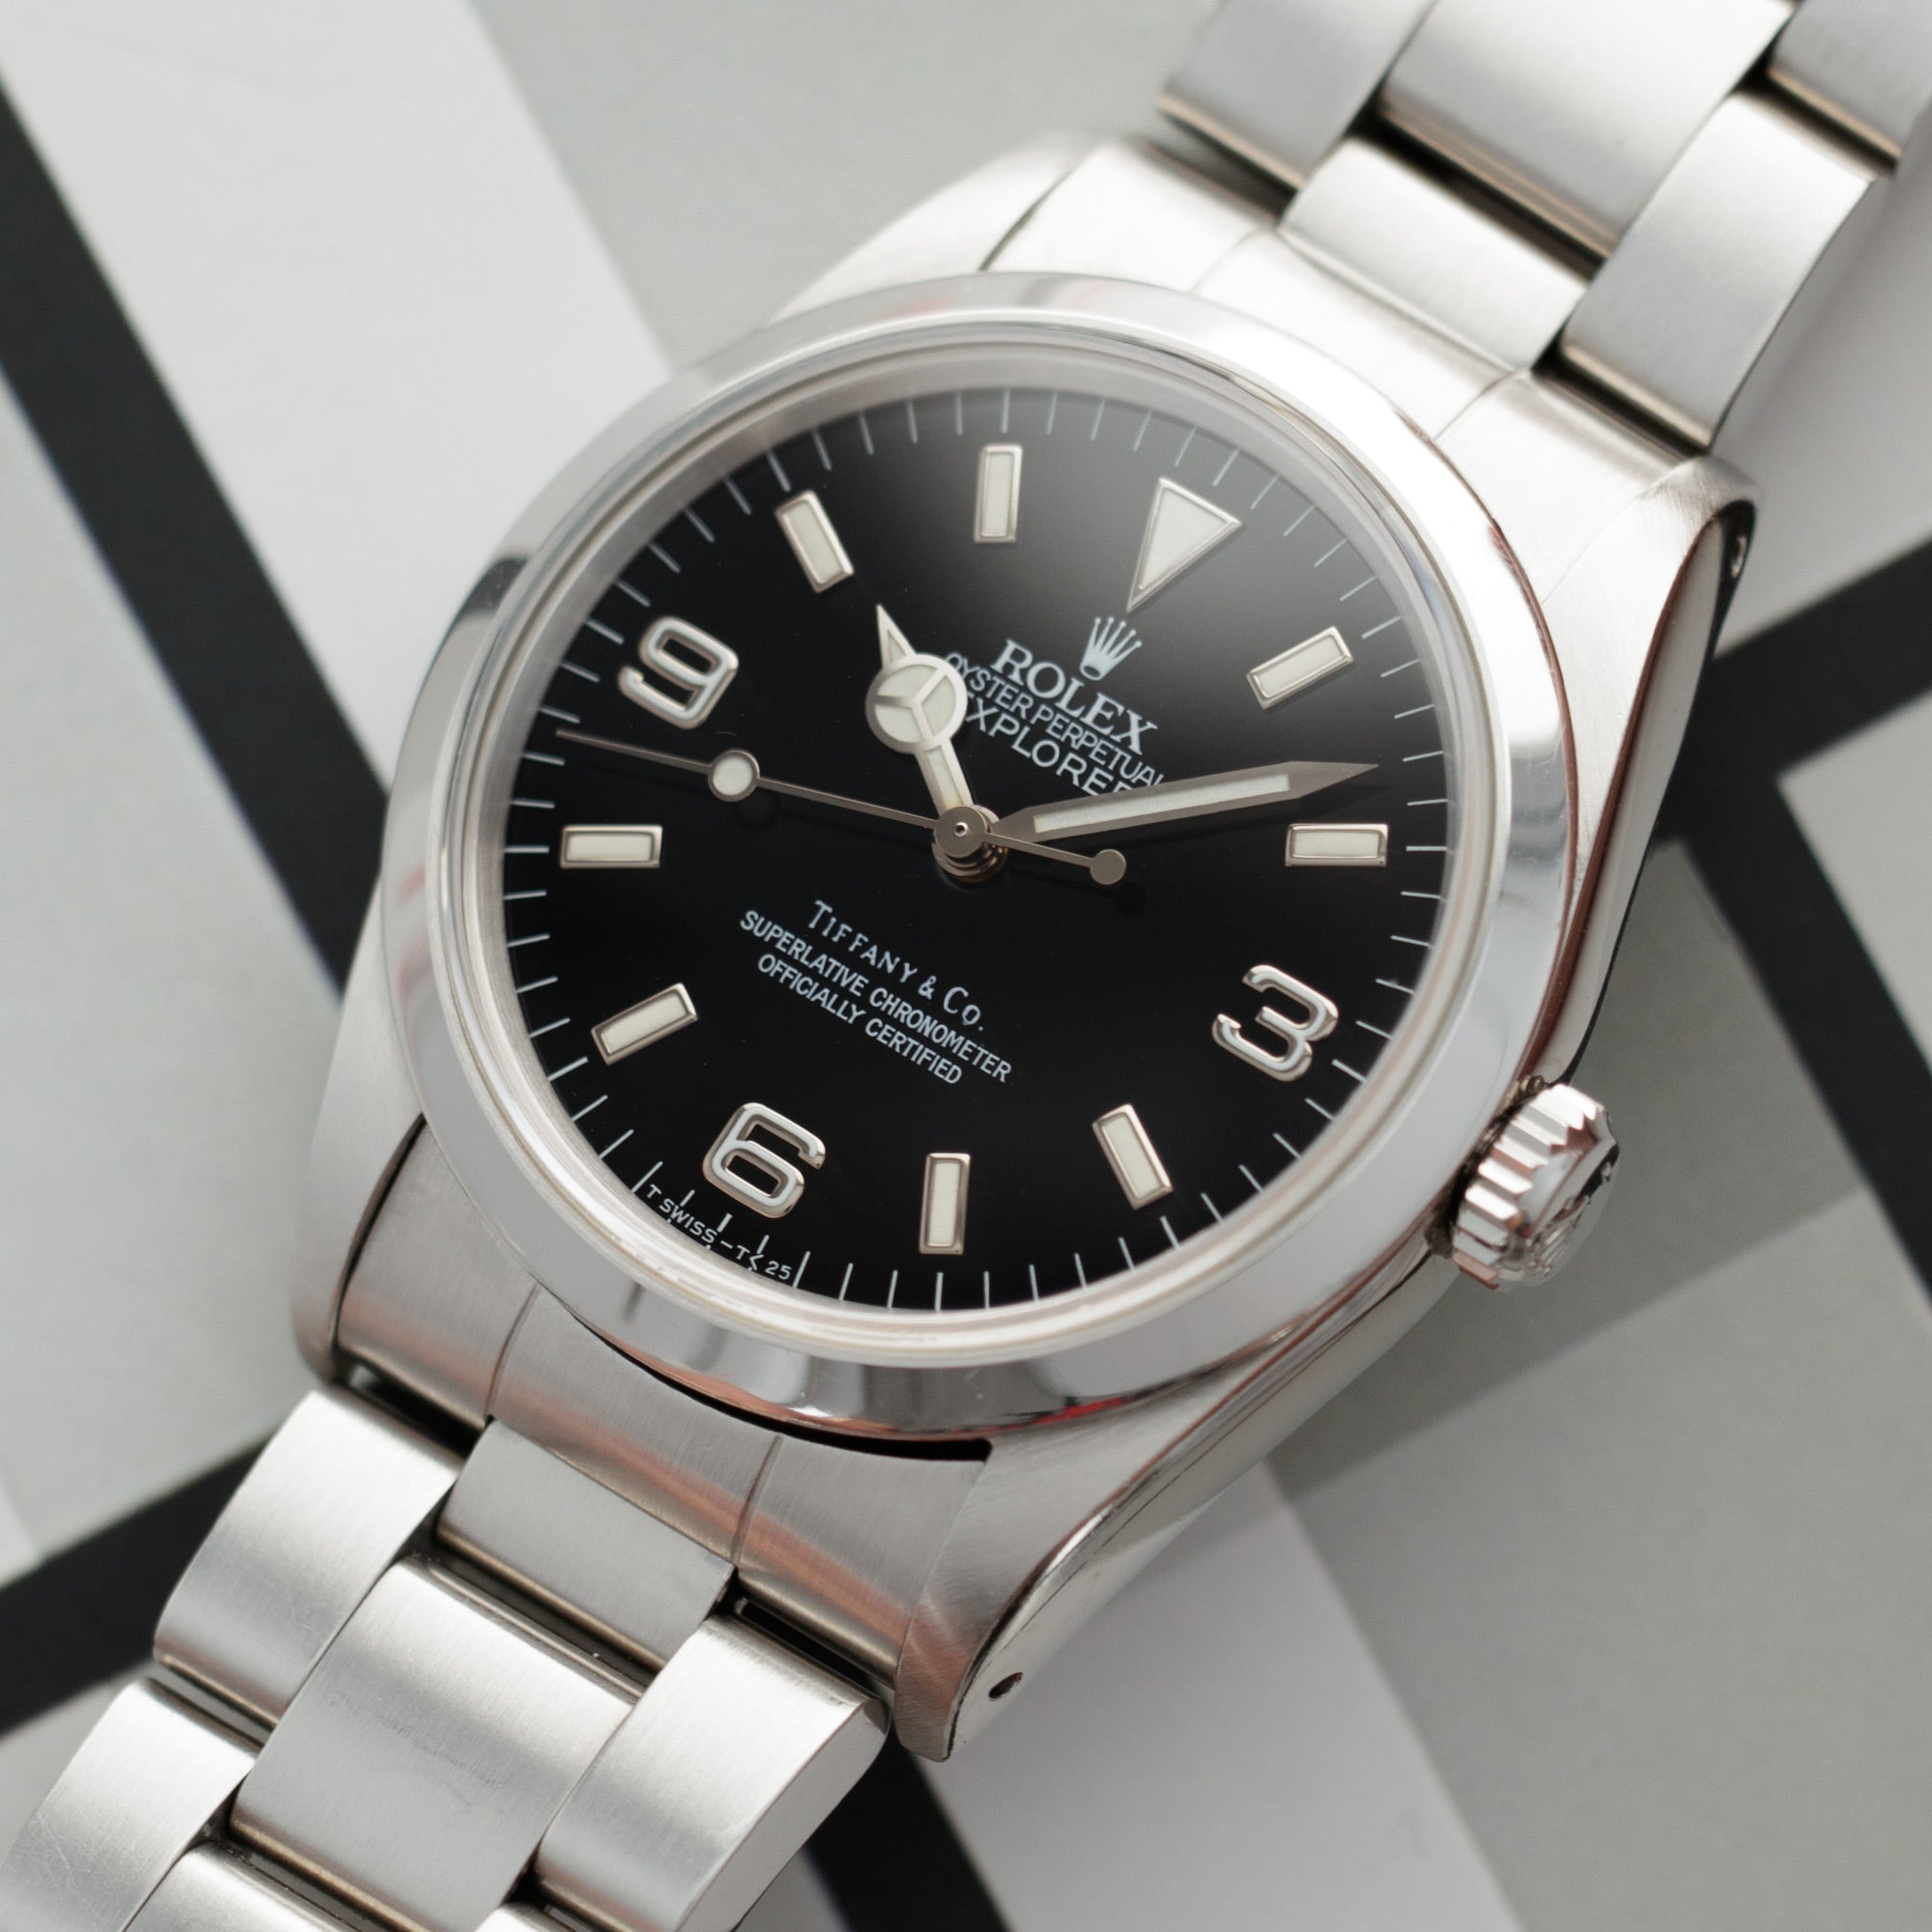 Rolex - Rolex Steel Explorer Ref. 14270 Retailed by Tiffany &amp; Co. - The Keystone Watches